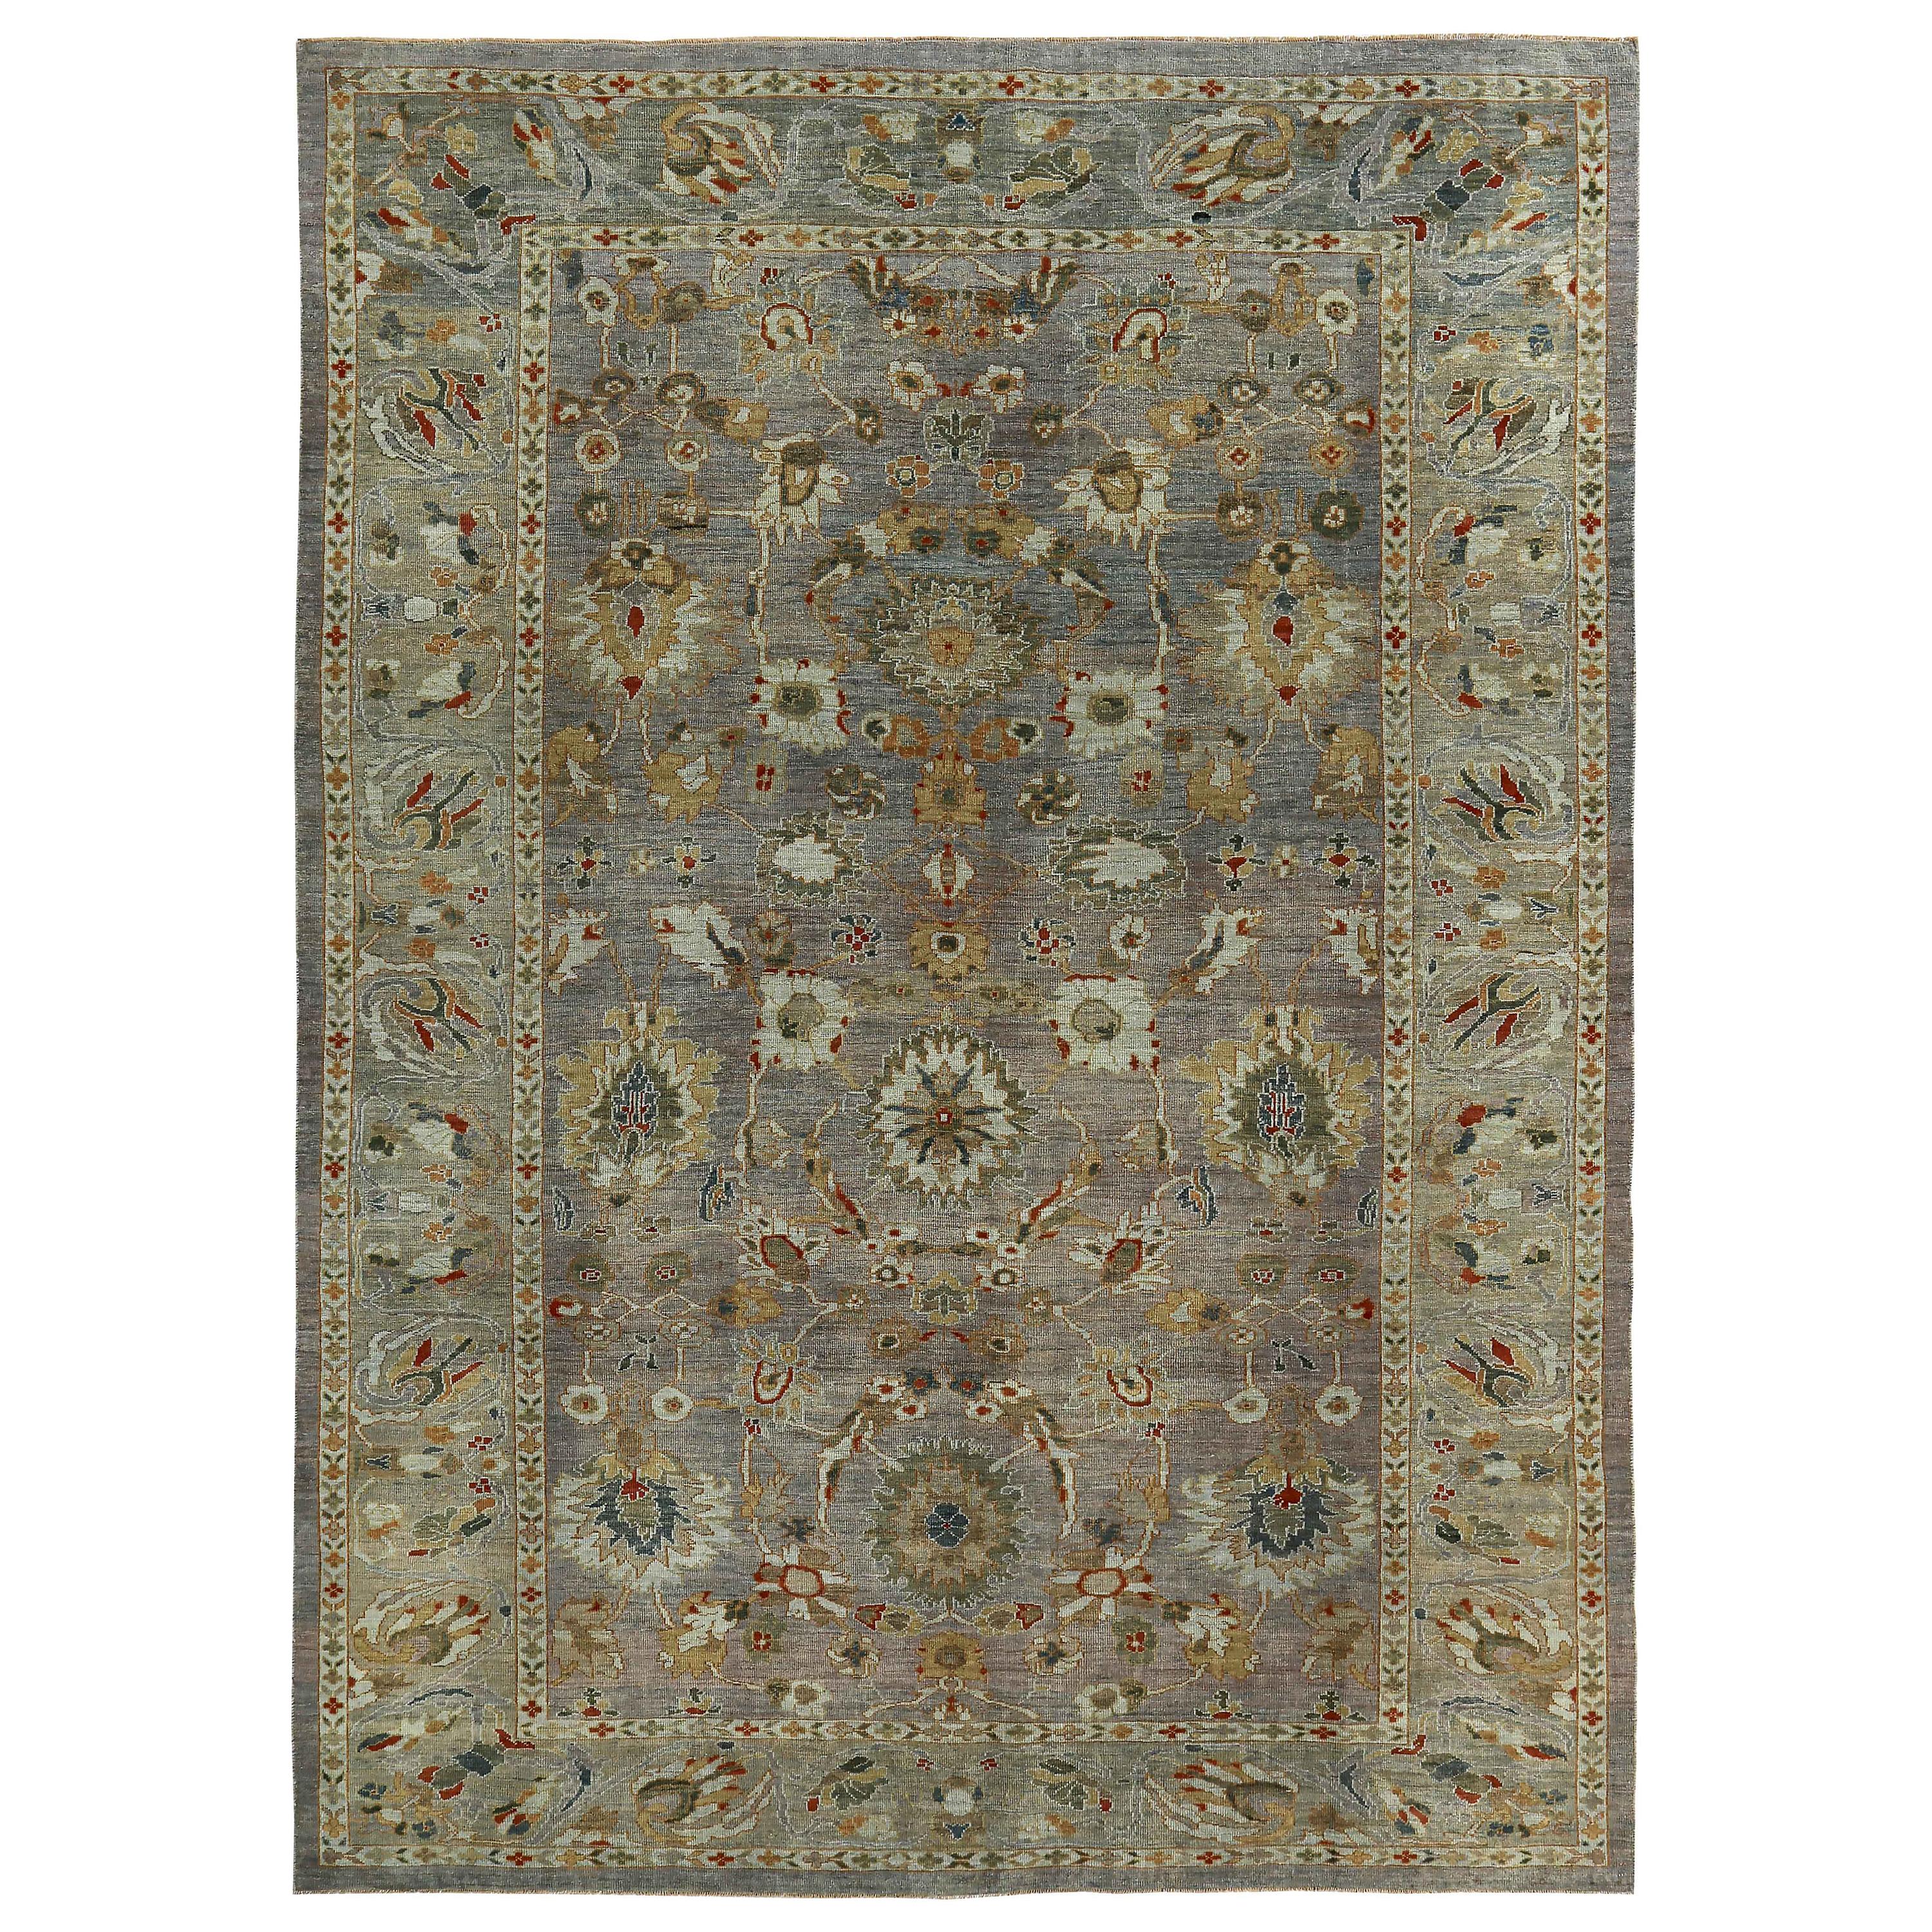 New Turkish Rug Sultanabad Design with Green and Red Botanical Details For Sale